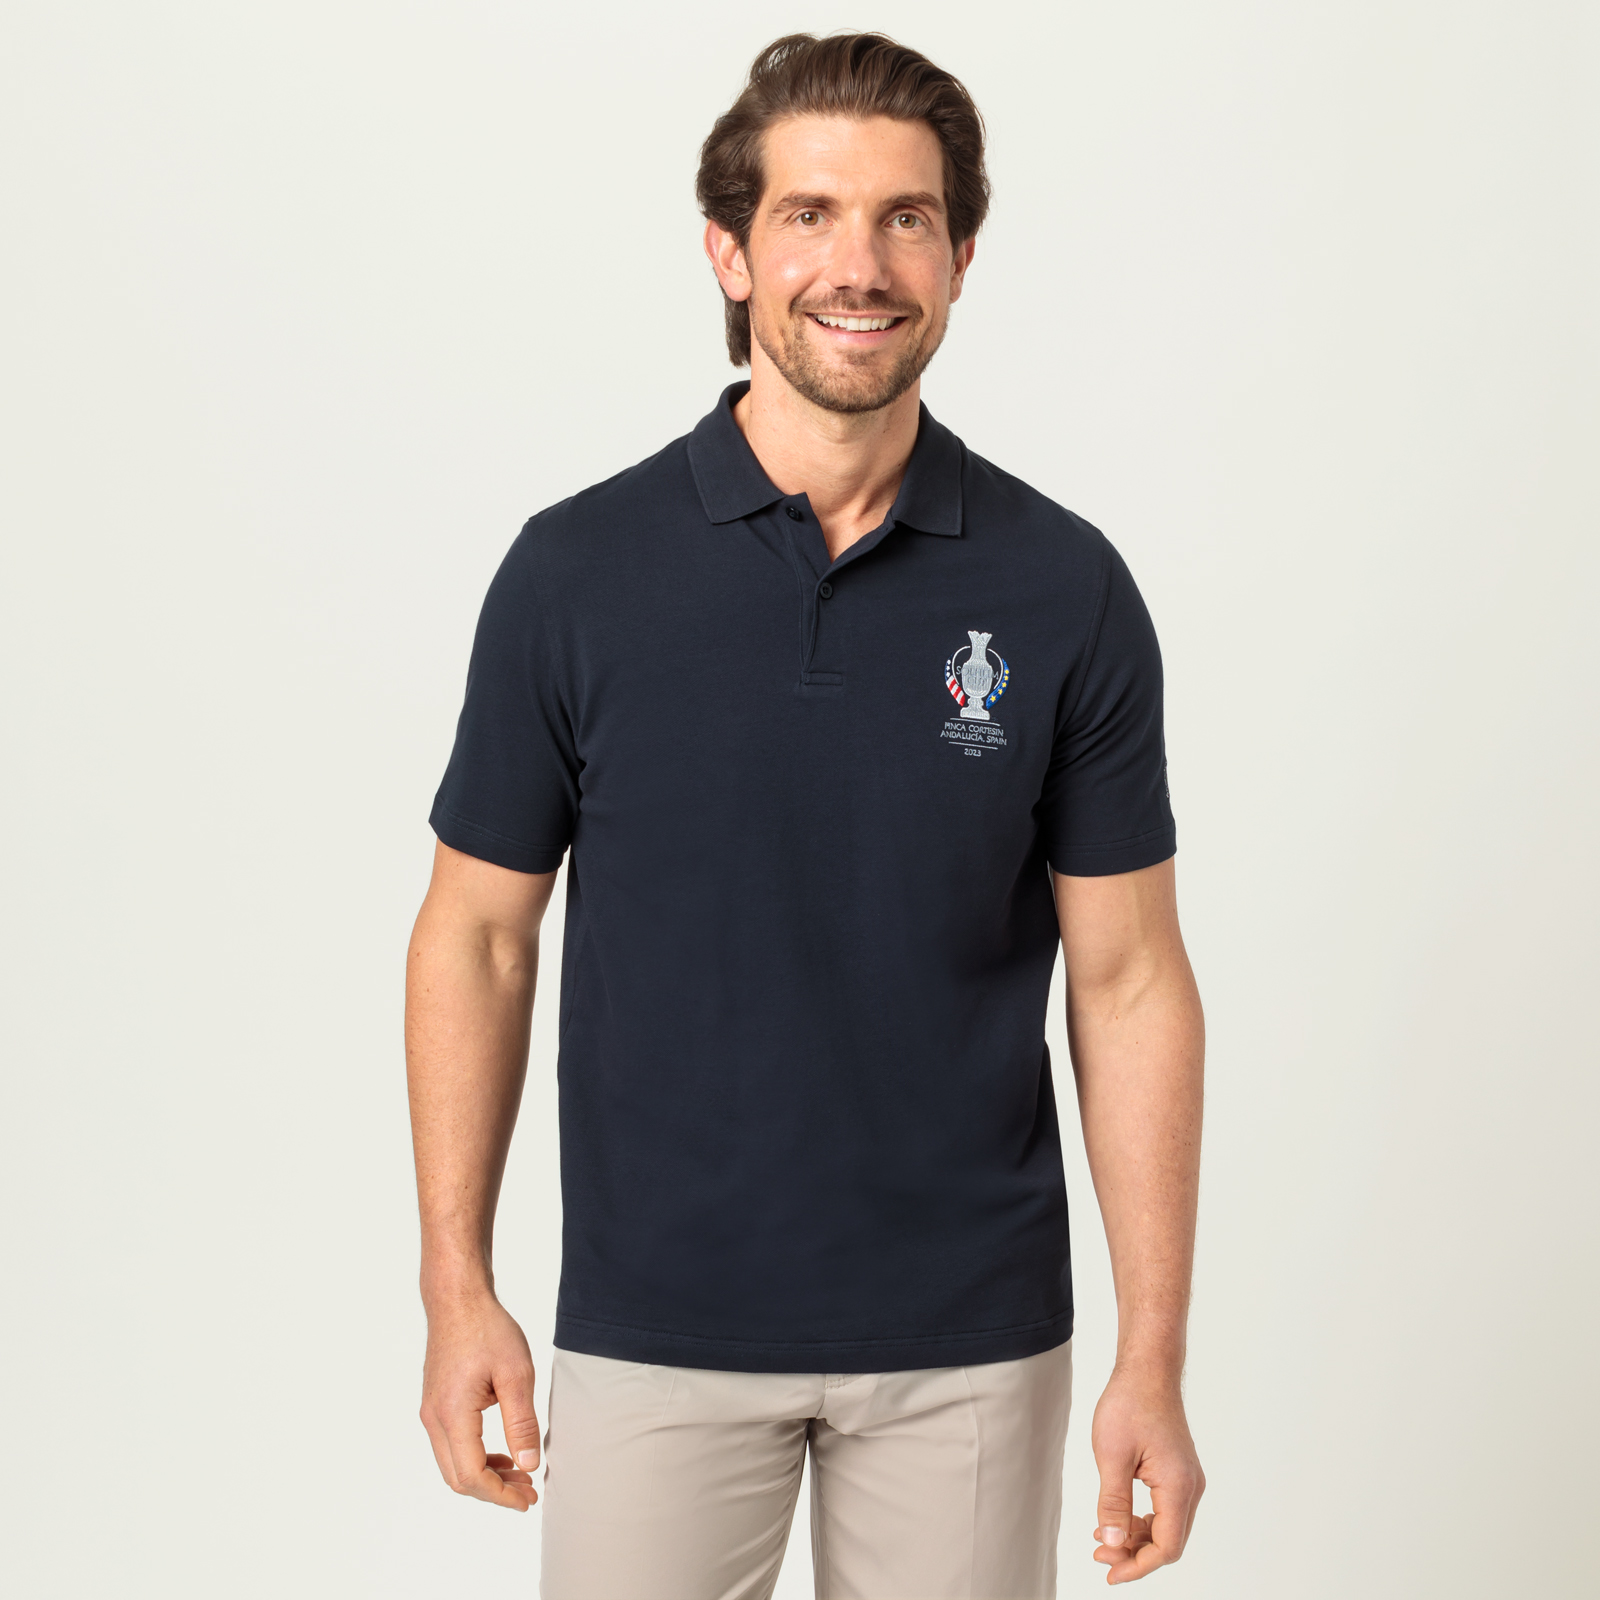 Classic golf polo shirt with sun protection in Solheim Cup design 